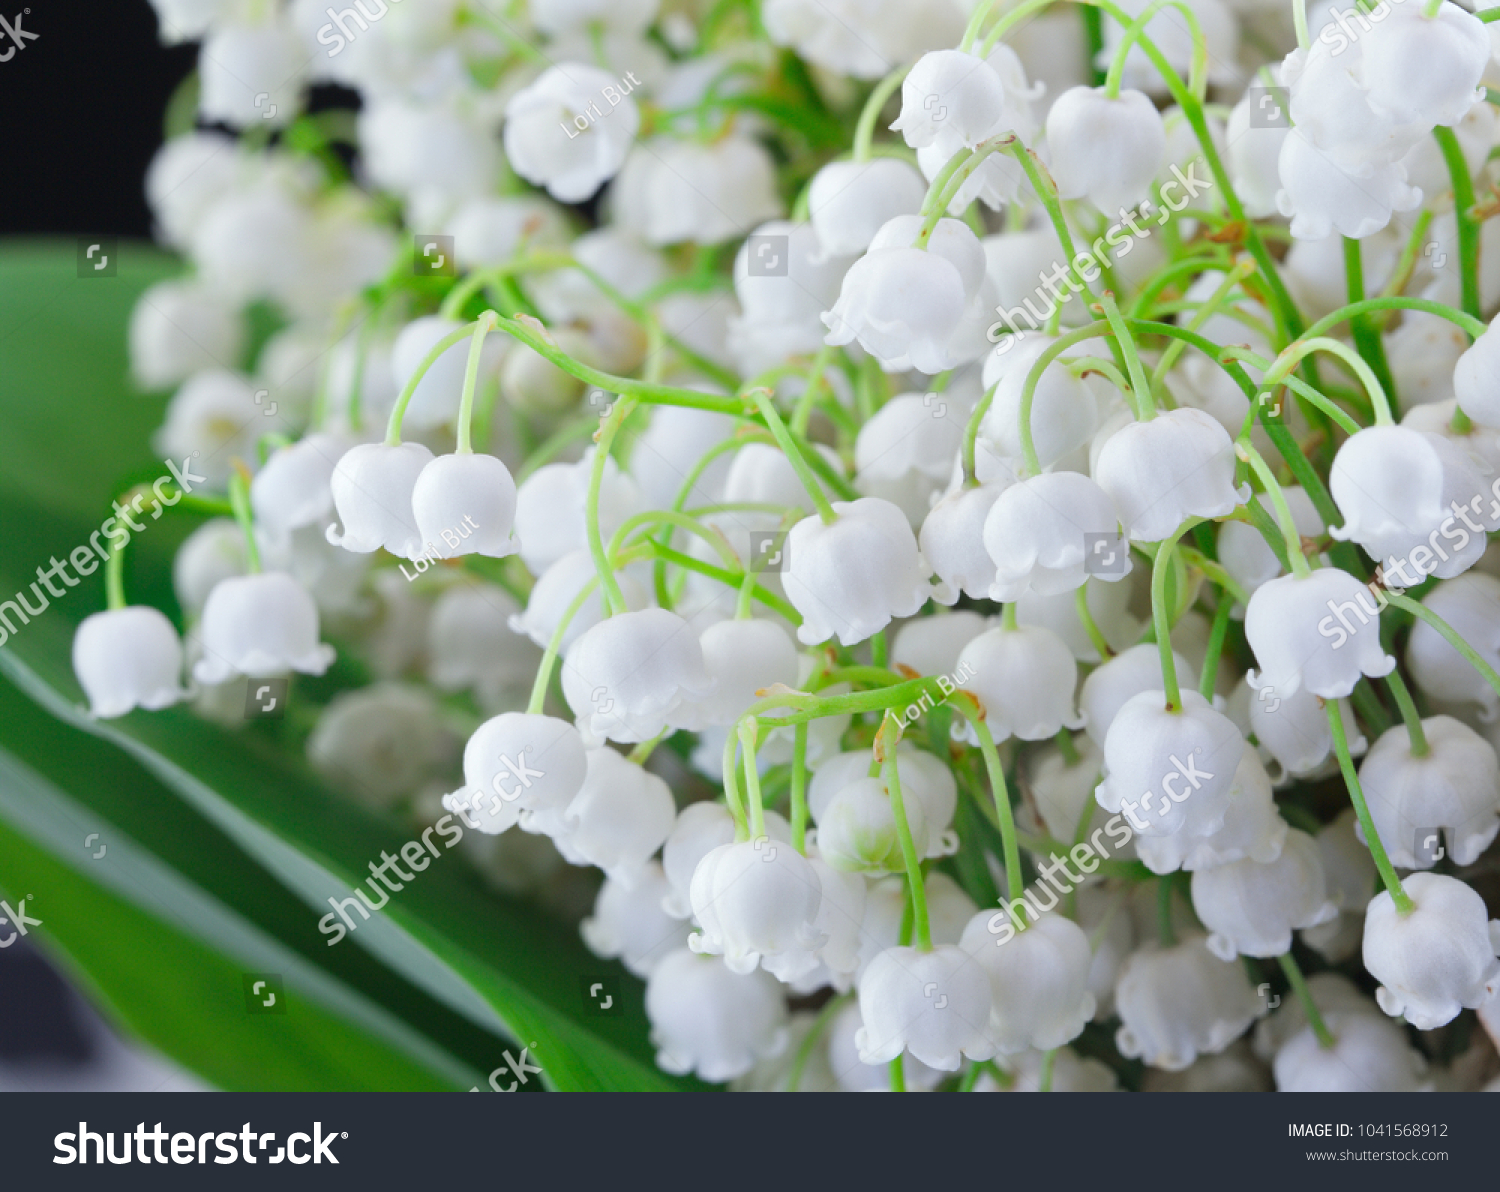 Green-muguet bouquet. White flowers bouquet. Bouquet of white lilies on black background. Bouquet of wildflowers lily of the valley. Spring floral background. Floral background. Selective focus. #1041568912